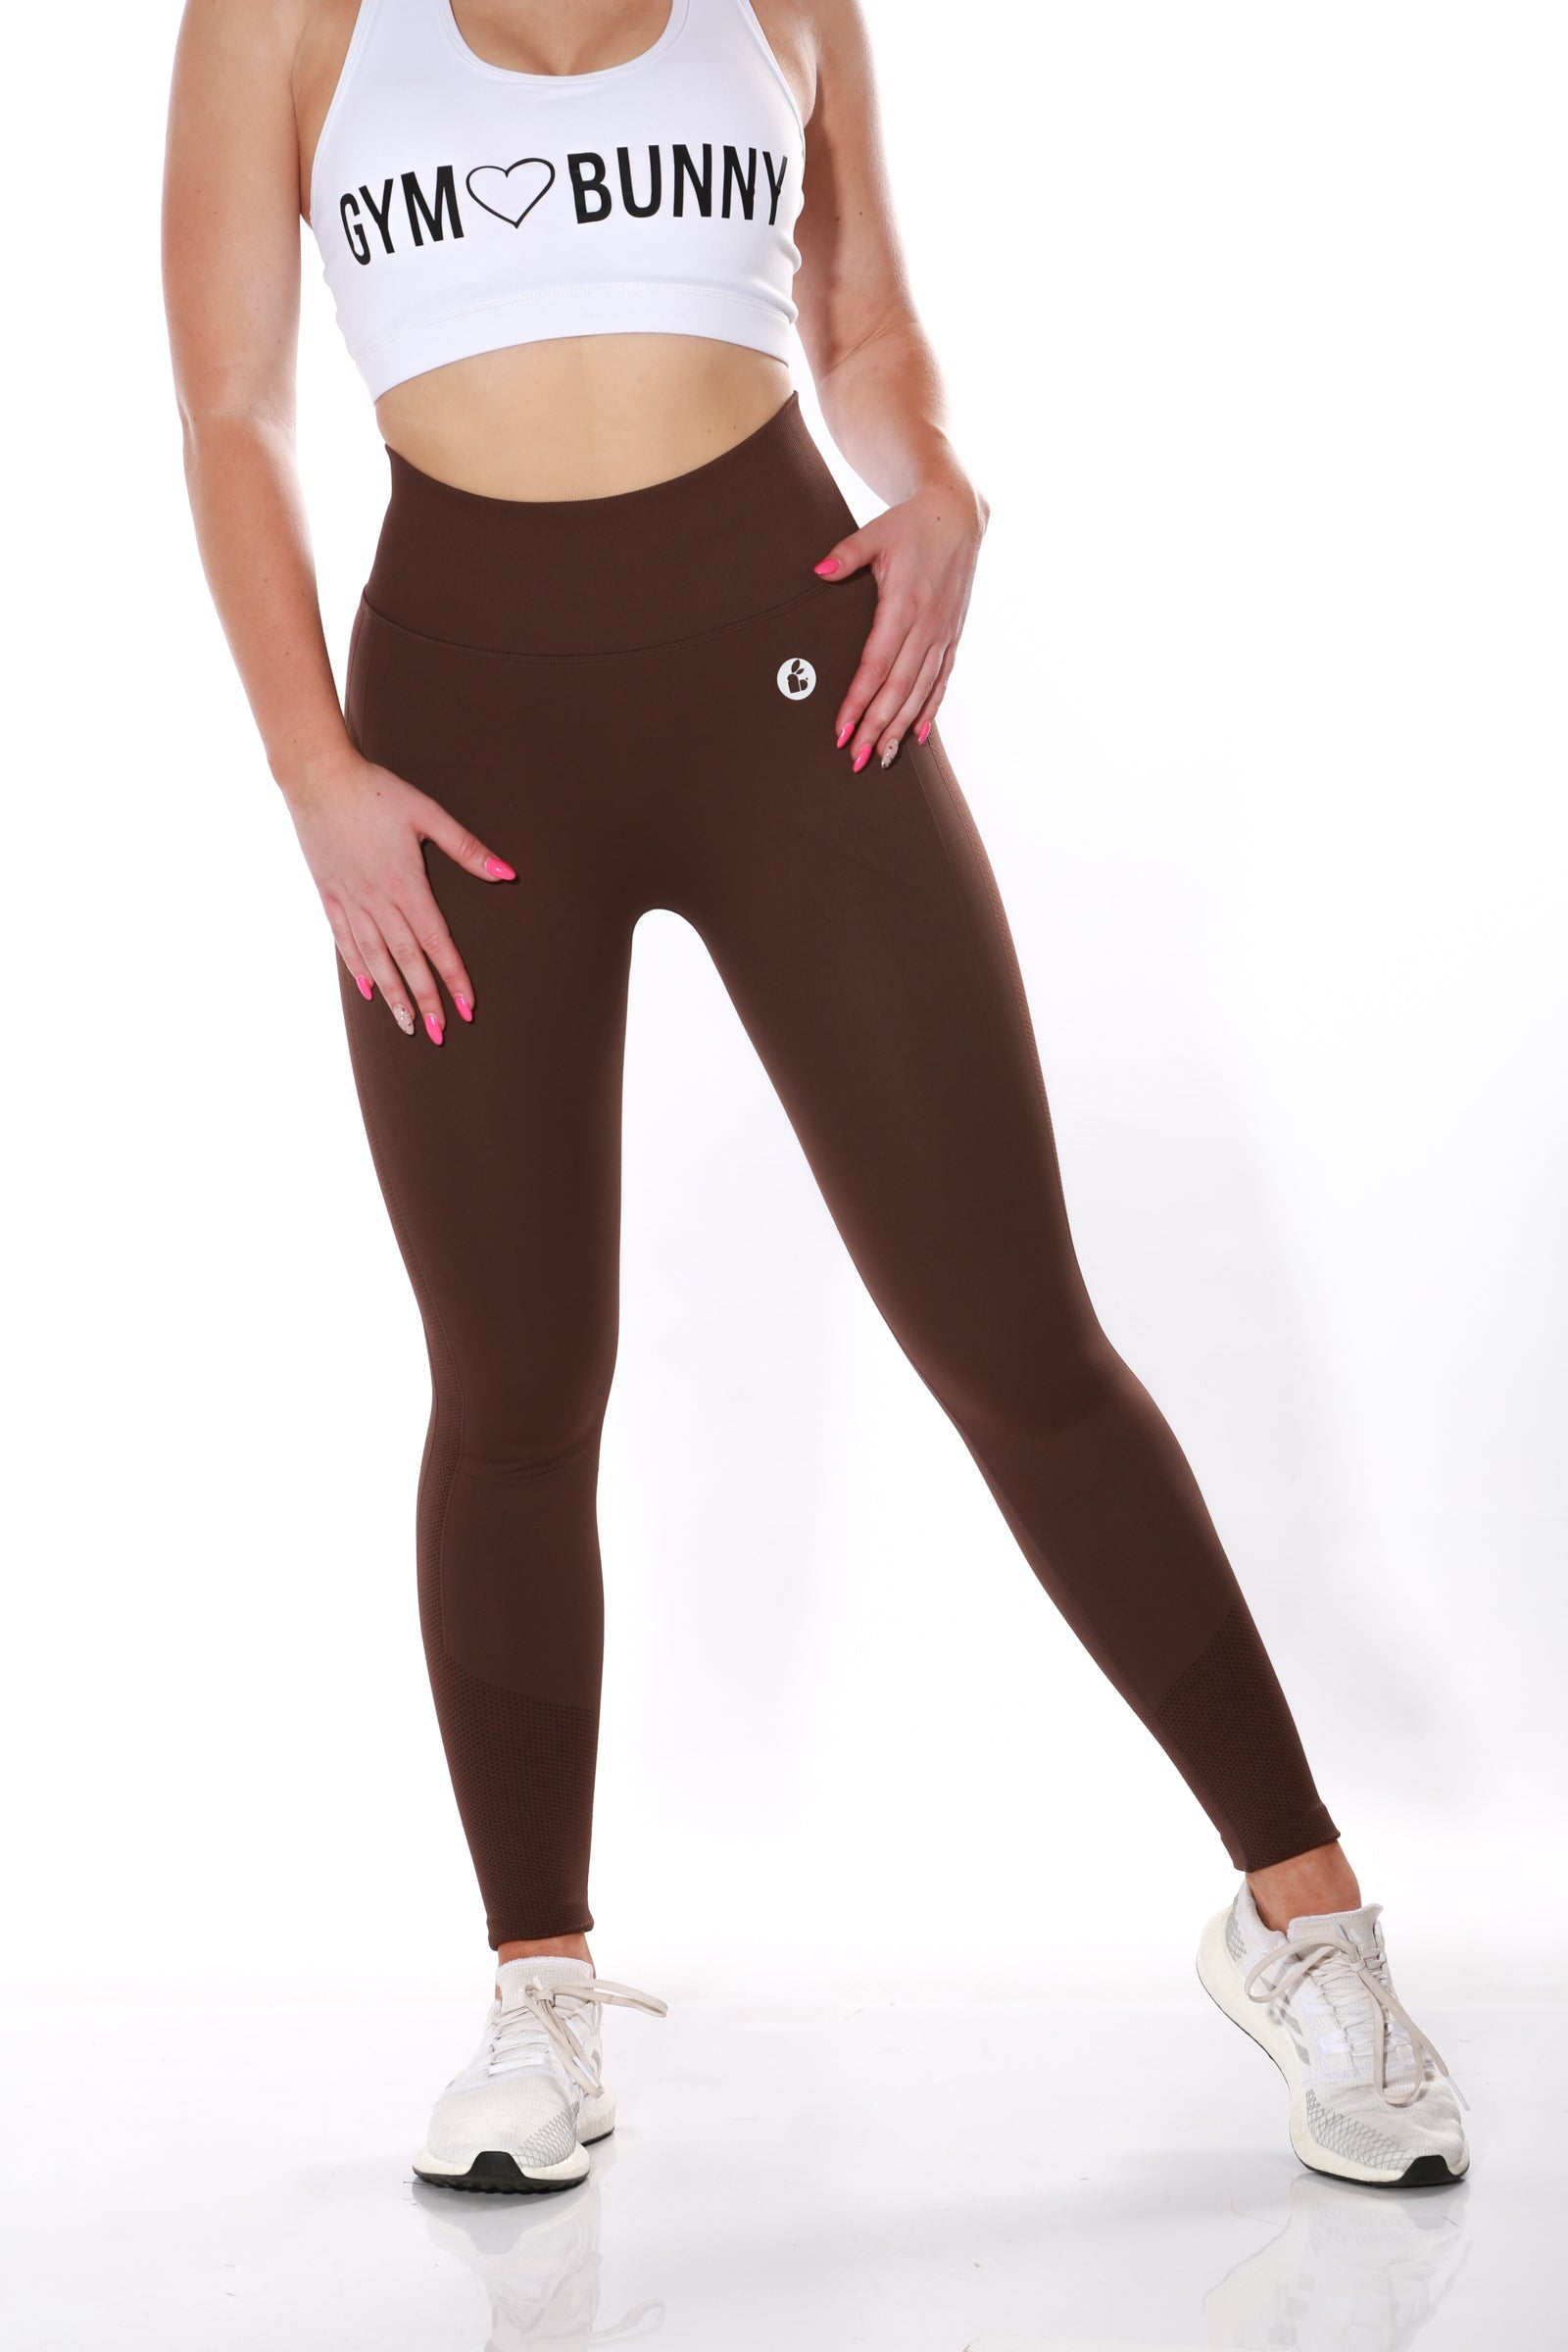 Gymbunny Seamless scrunch leggings have contour shadowing designed